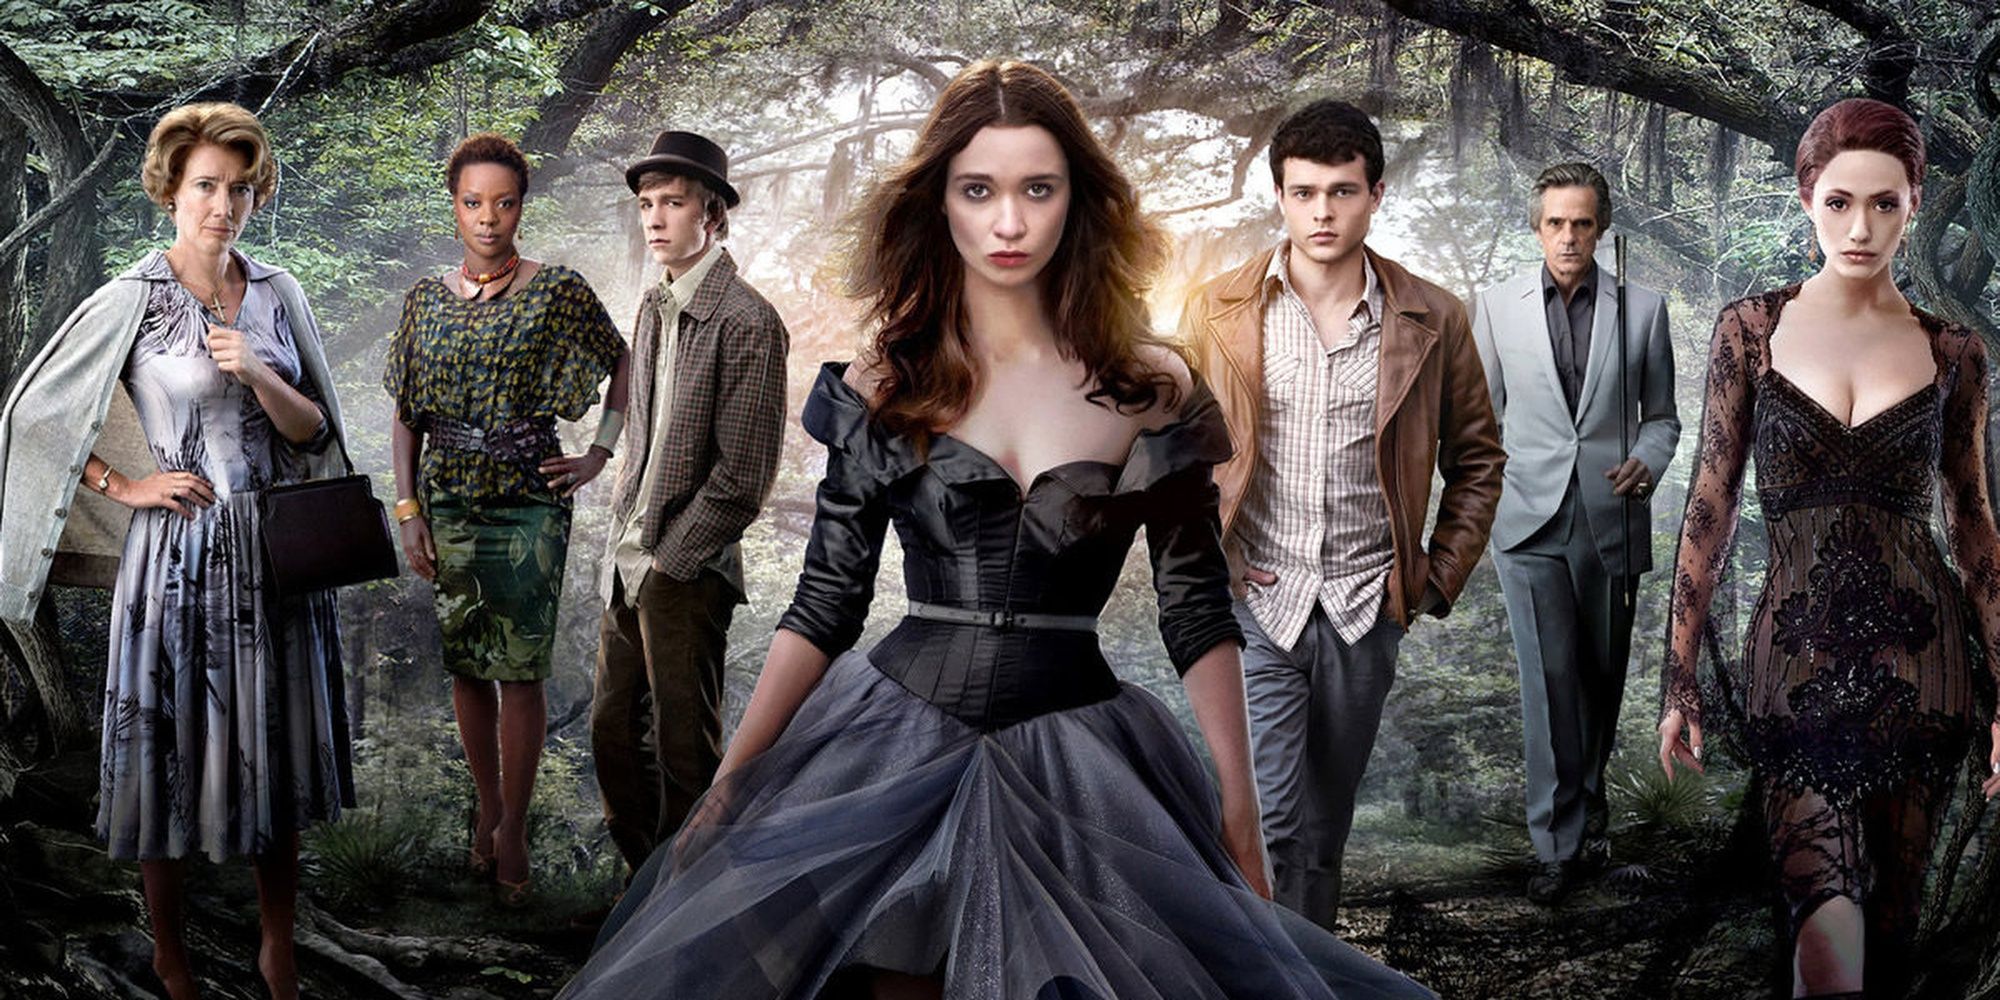 The cast of Beautiful Creatures